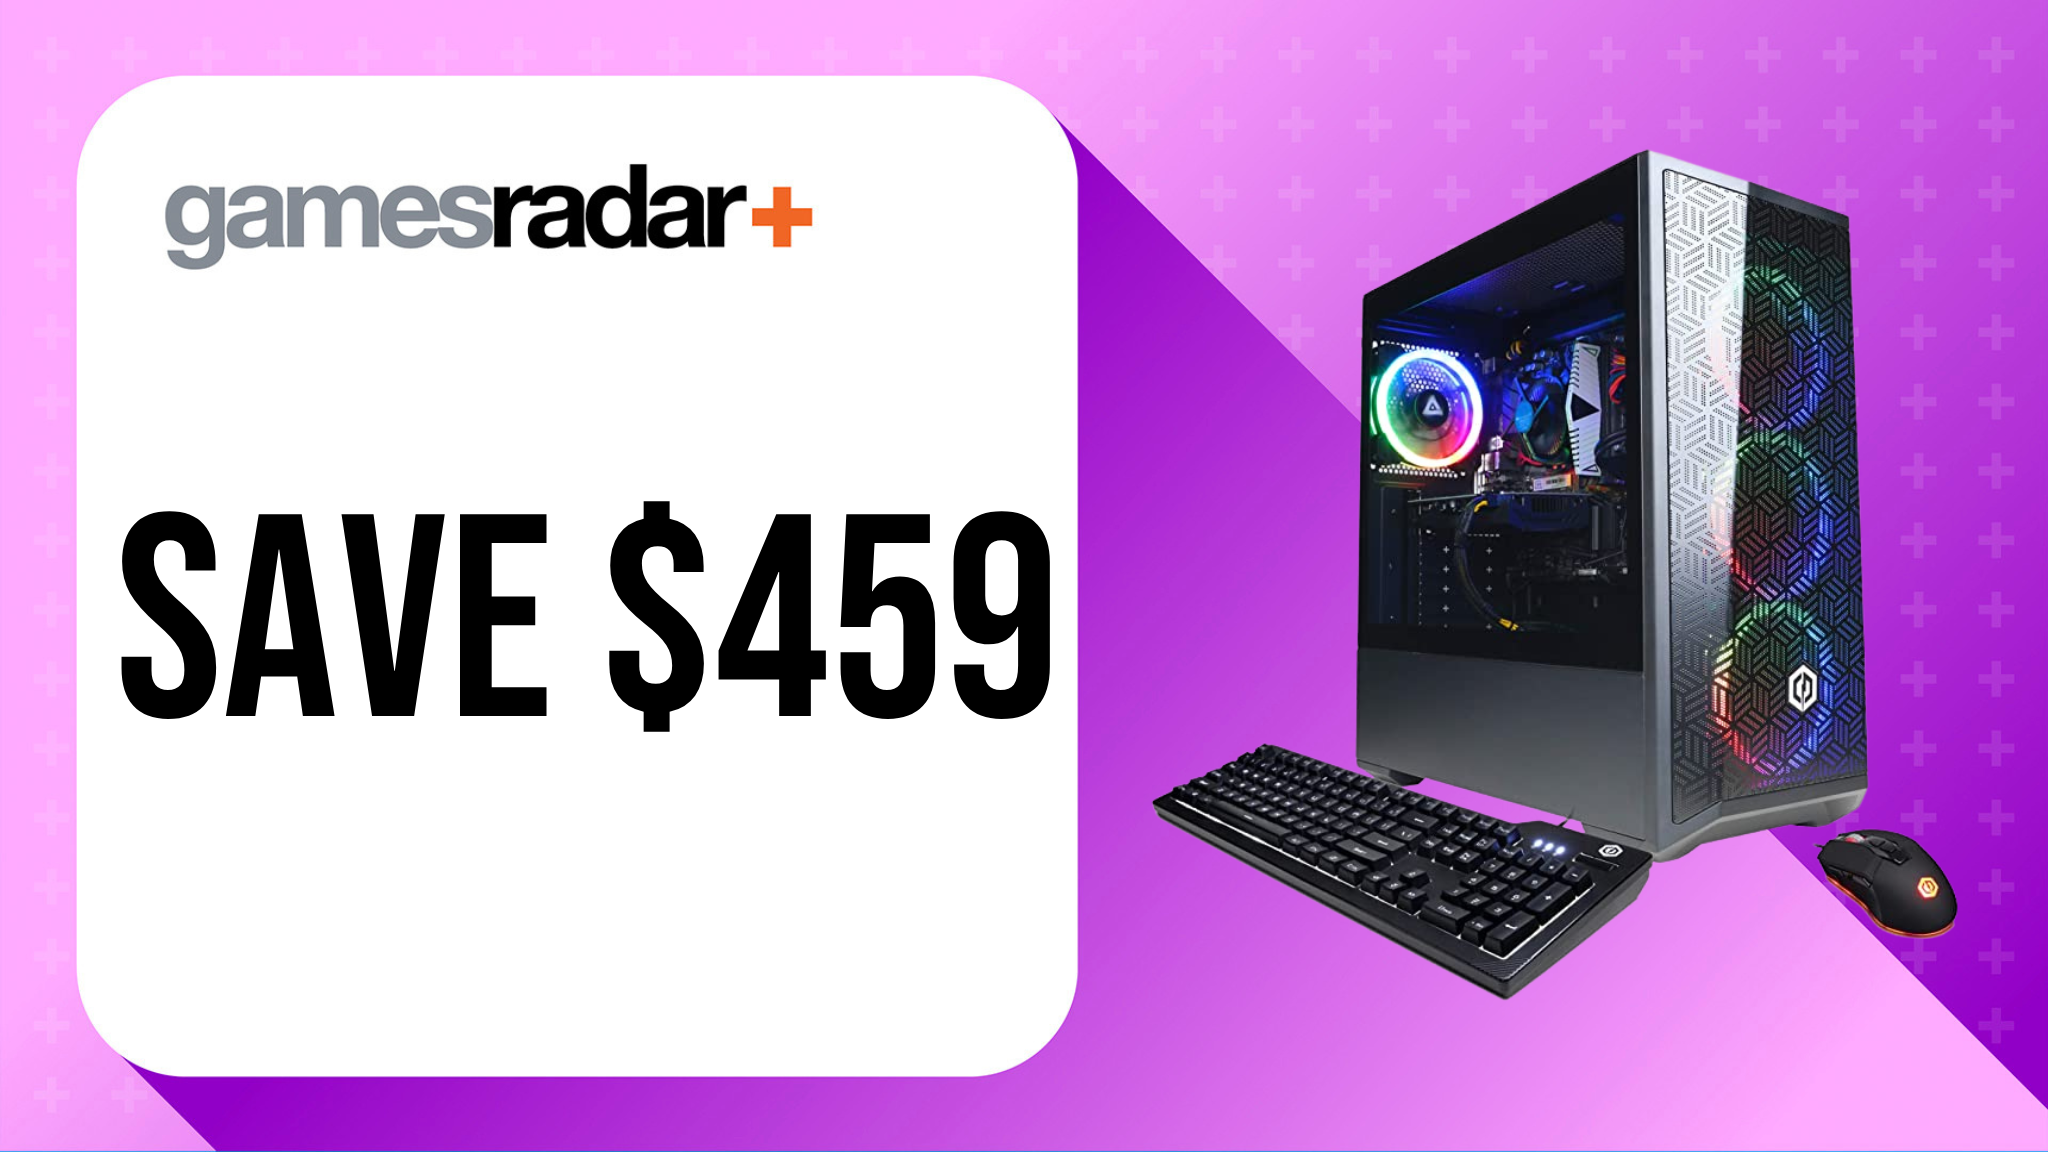 CyberPowerPC Gamer Xtreme Deal image with $459 saving and purple background